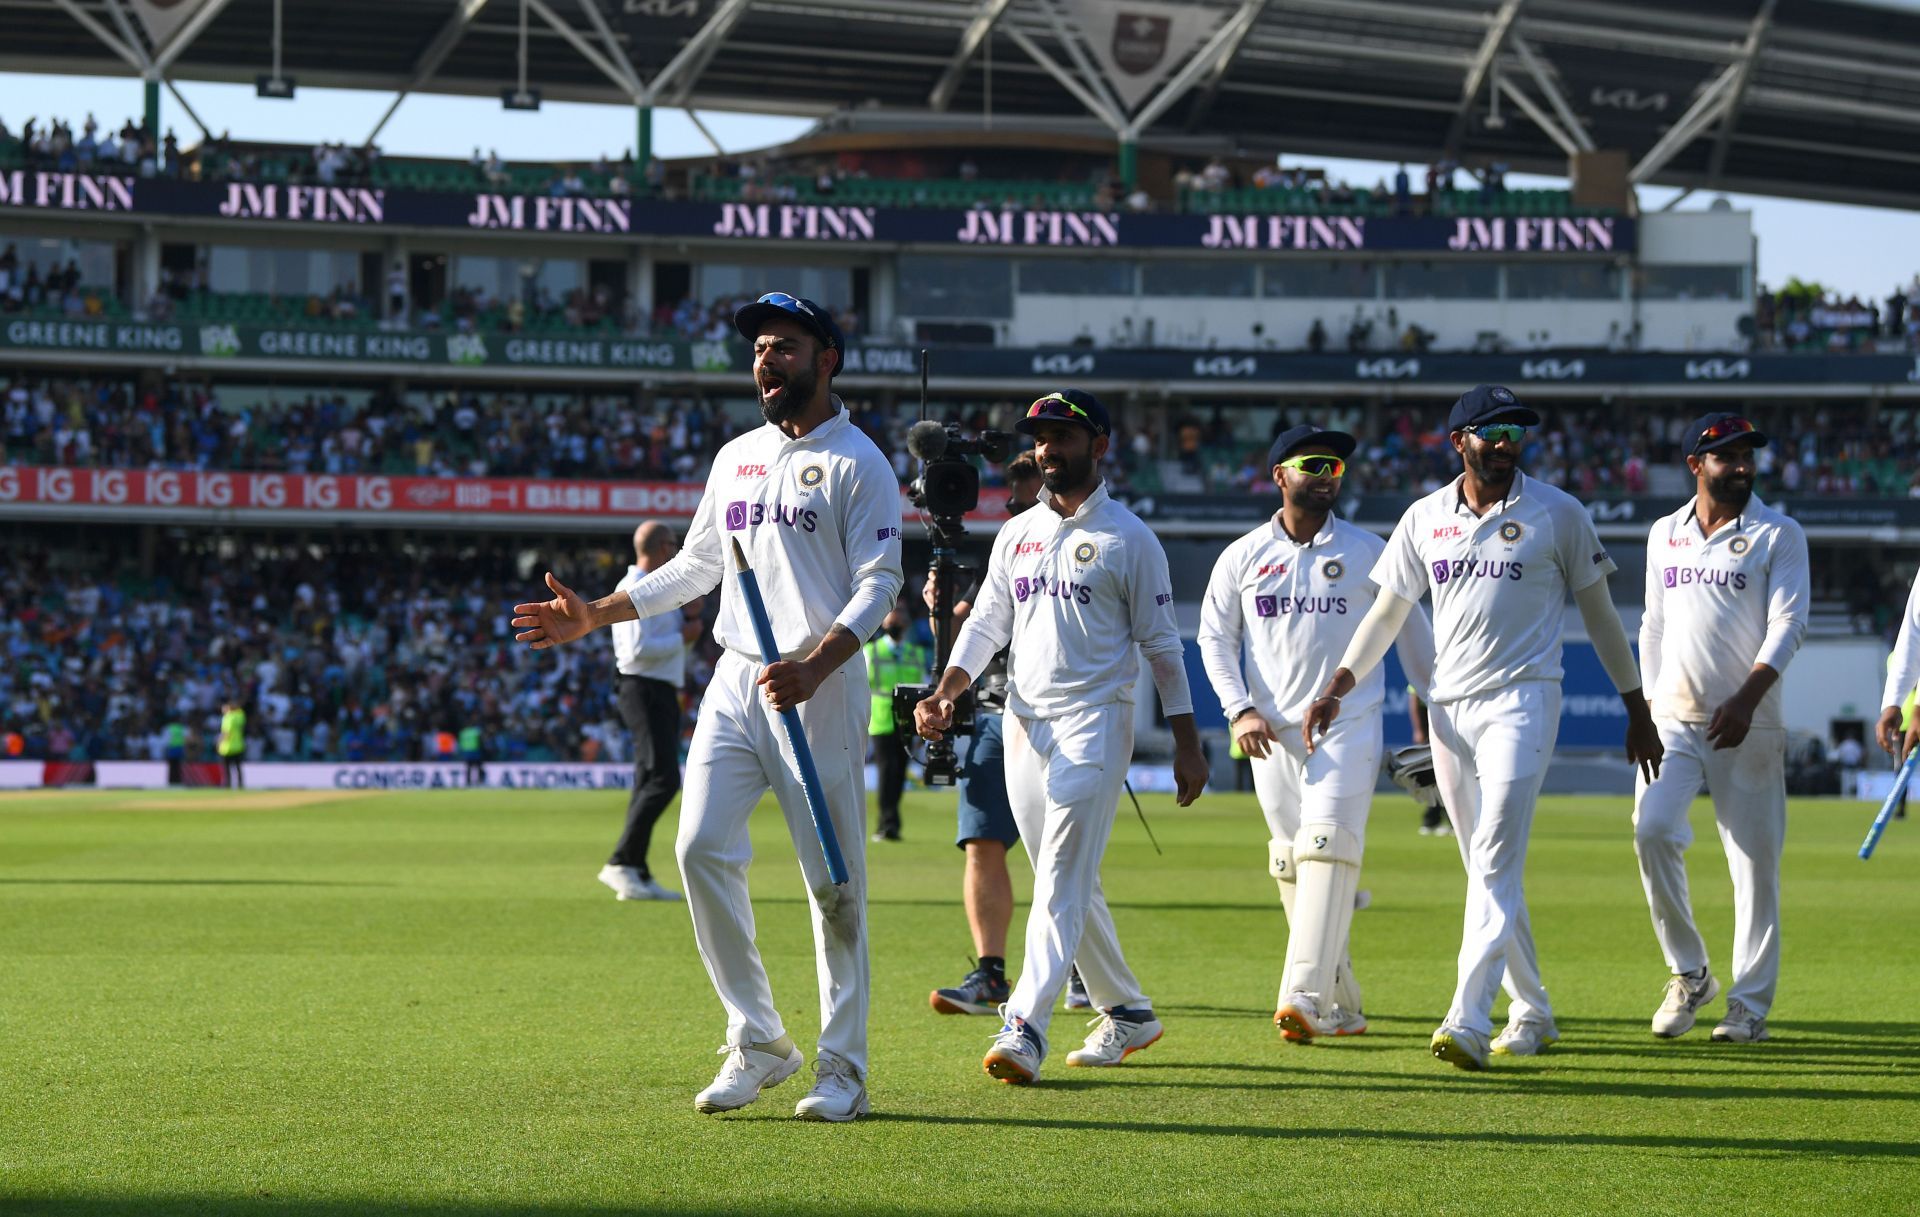 India defeated England in the last Test they played at The Oval.